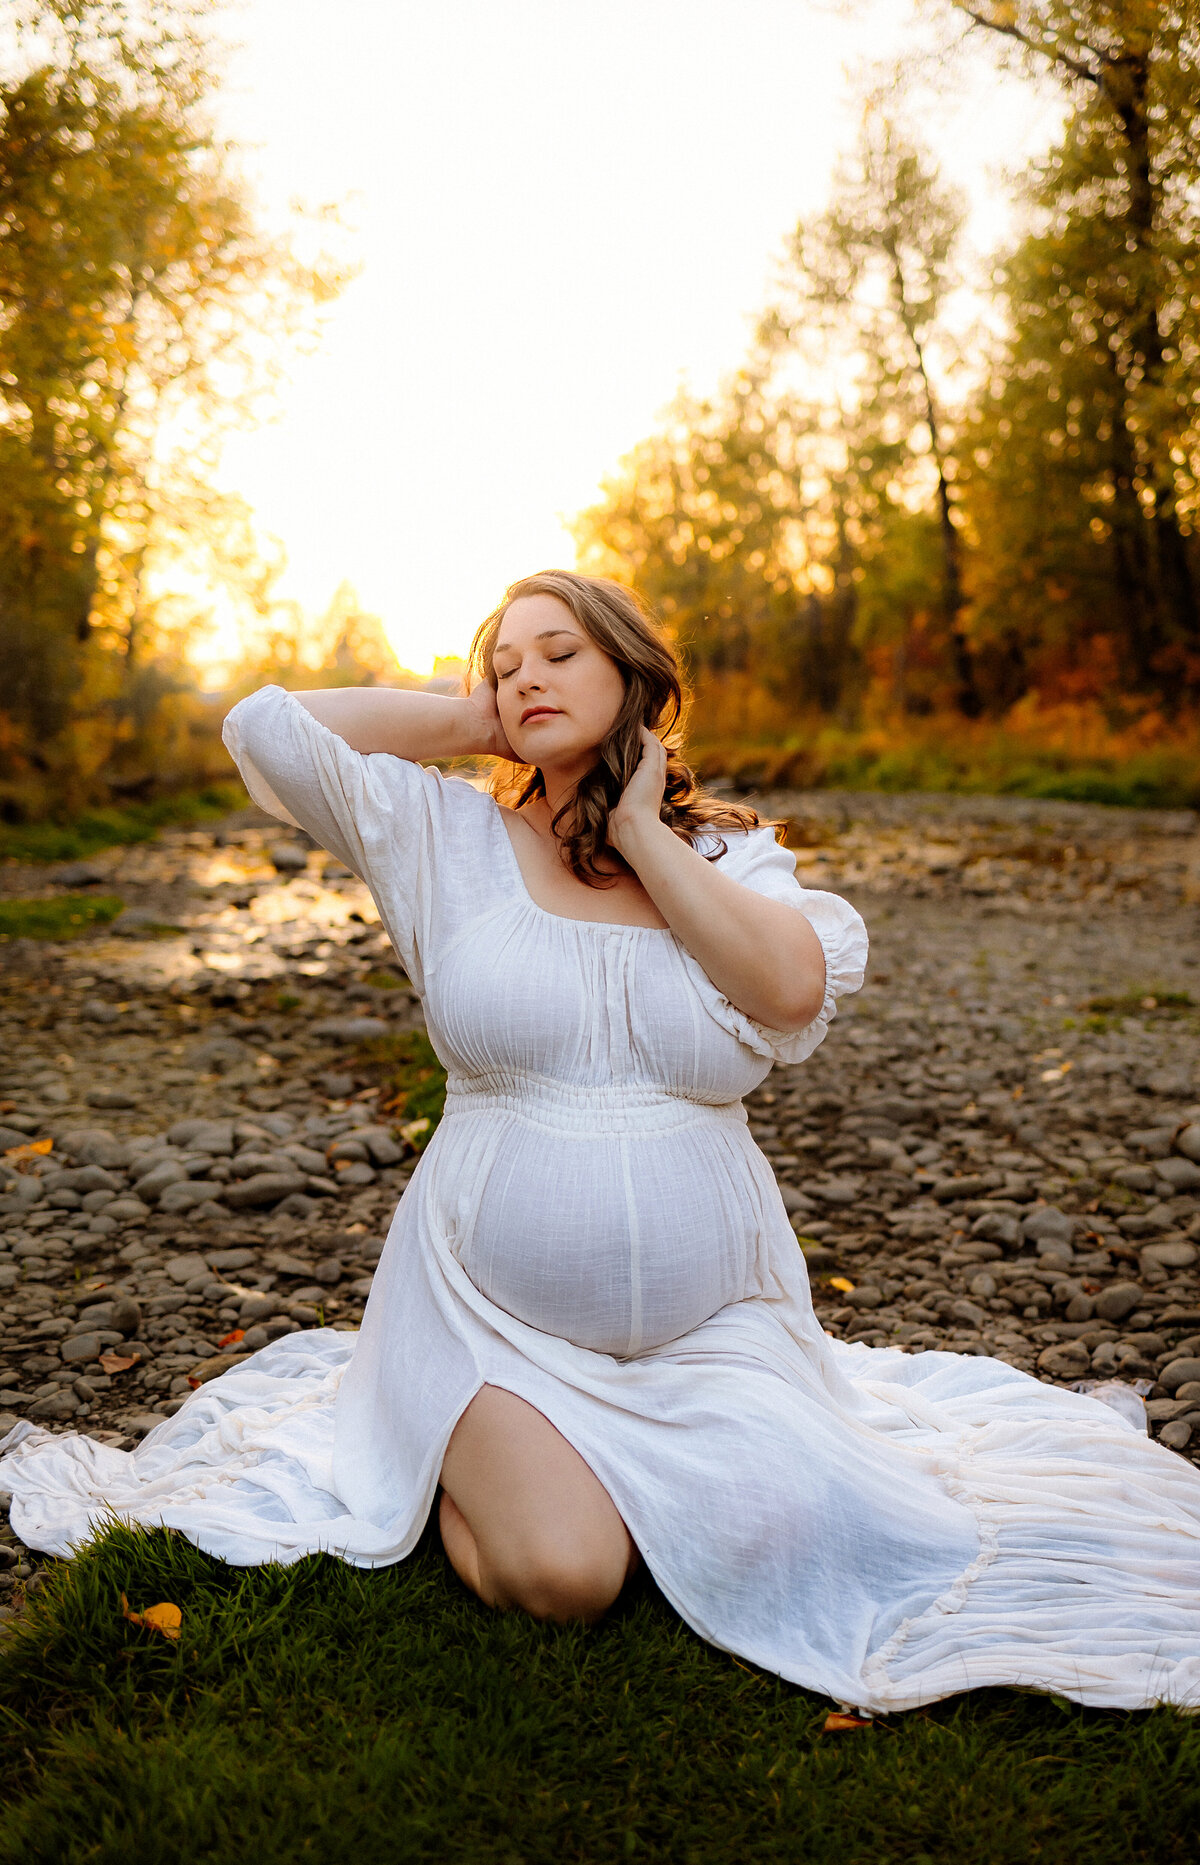 My focus as a maternity photographer in Calgary is on nurturing the beauty of this phase. Join me in capturing the love, grace, and emotion of your pregnancy.